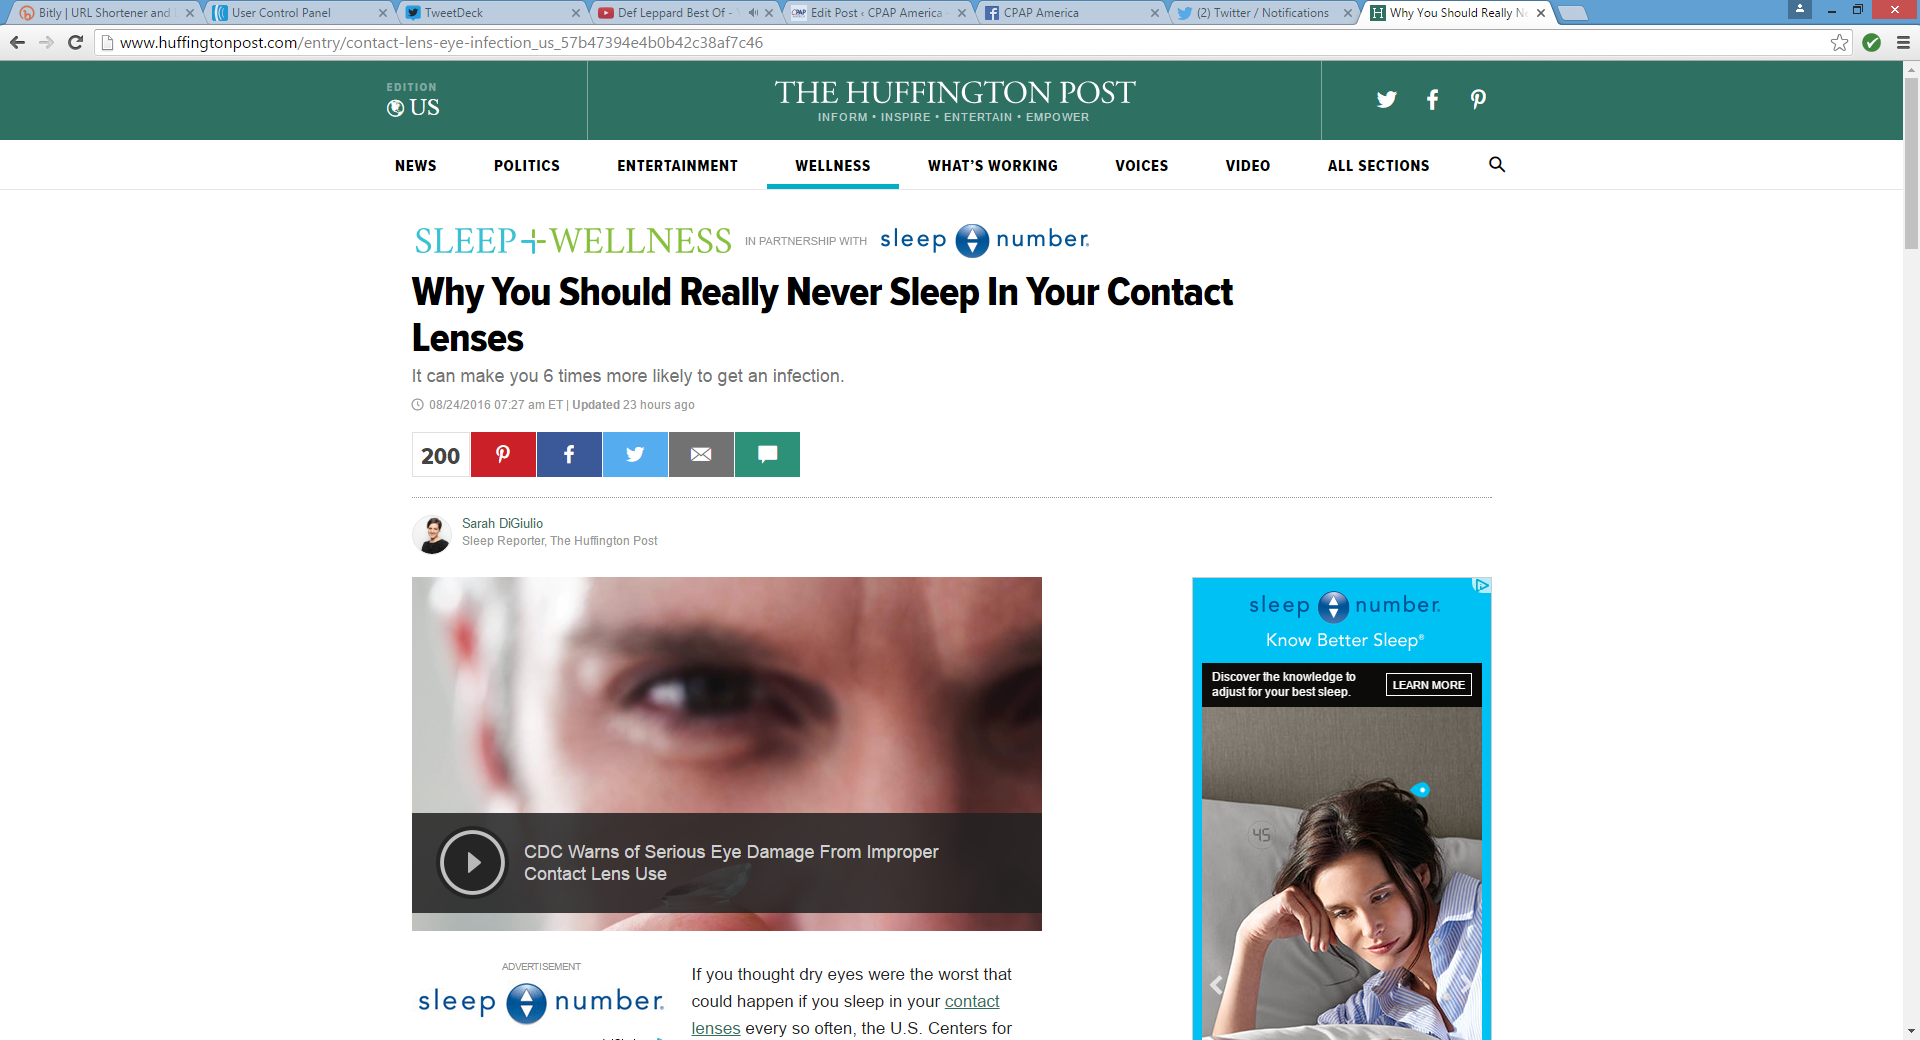 Why You Shouldn't Sleep Wearing Your Contact Lenses